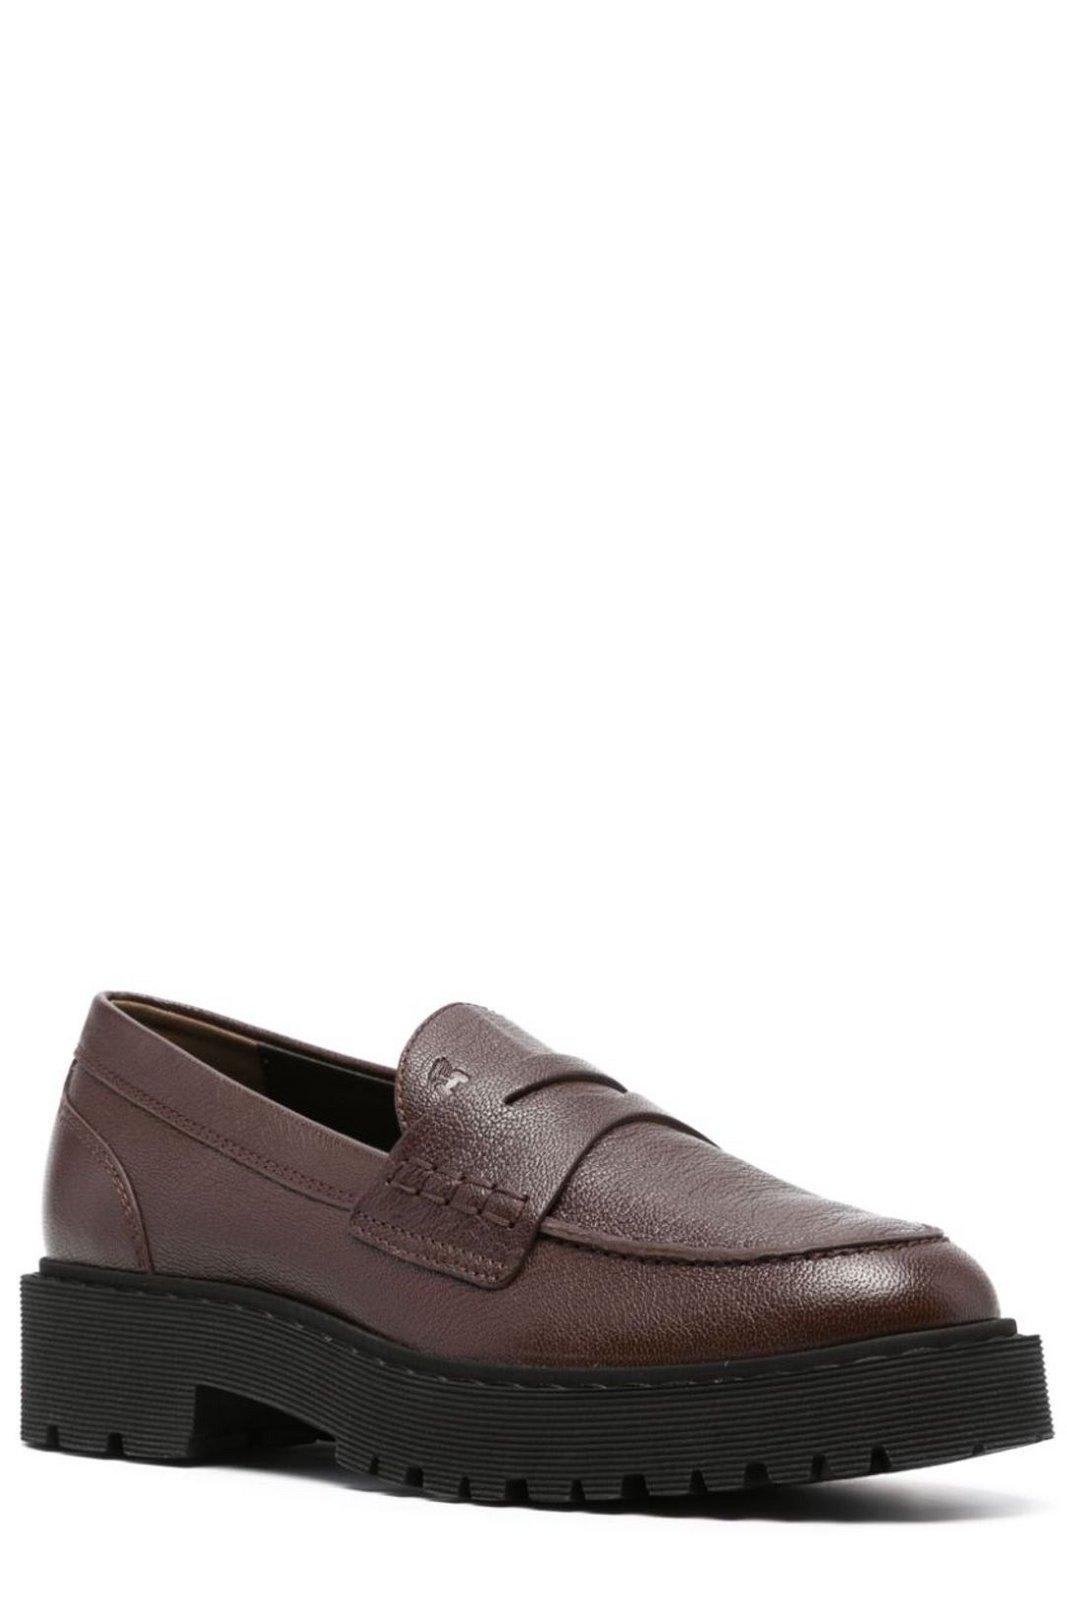 Shop Hogan Round-toe Slip-on Loafers In Brown